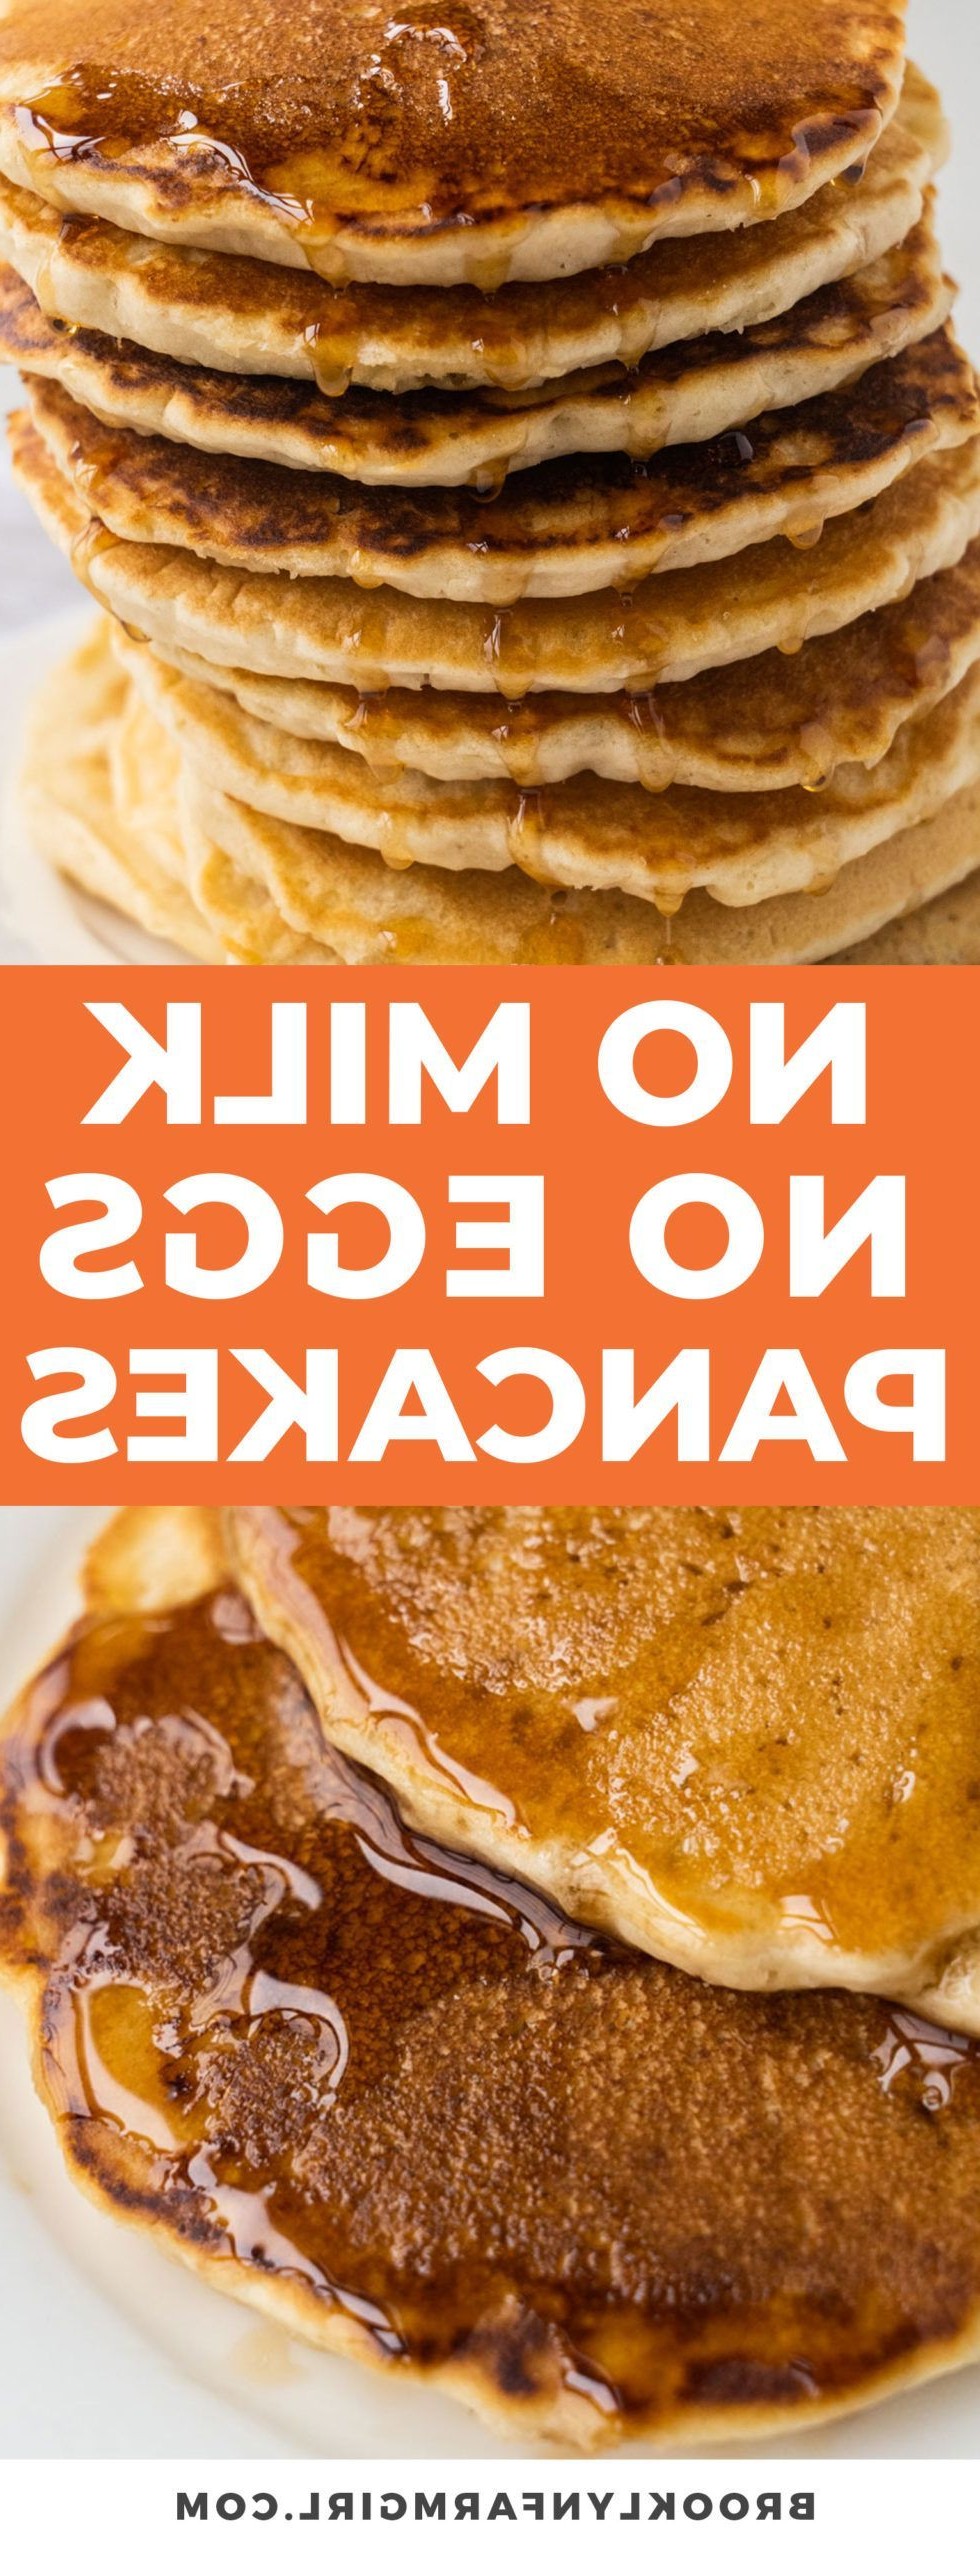 pancake recipe with no butter - Bread Coconut Flour 2021